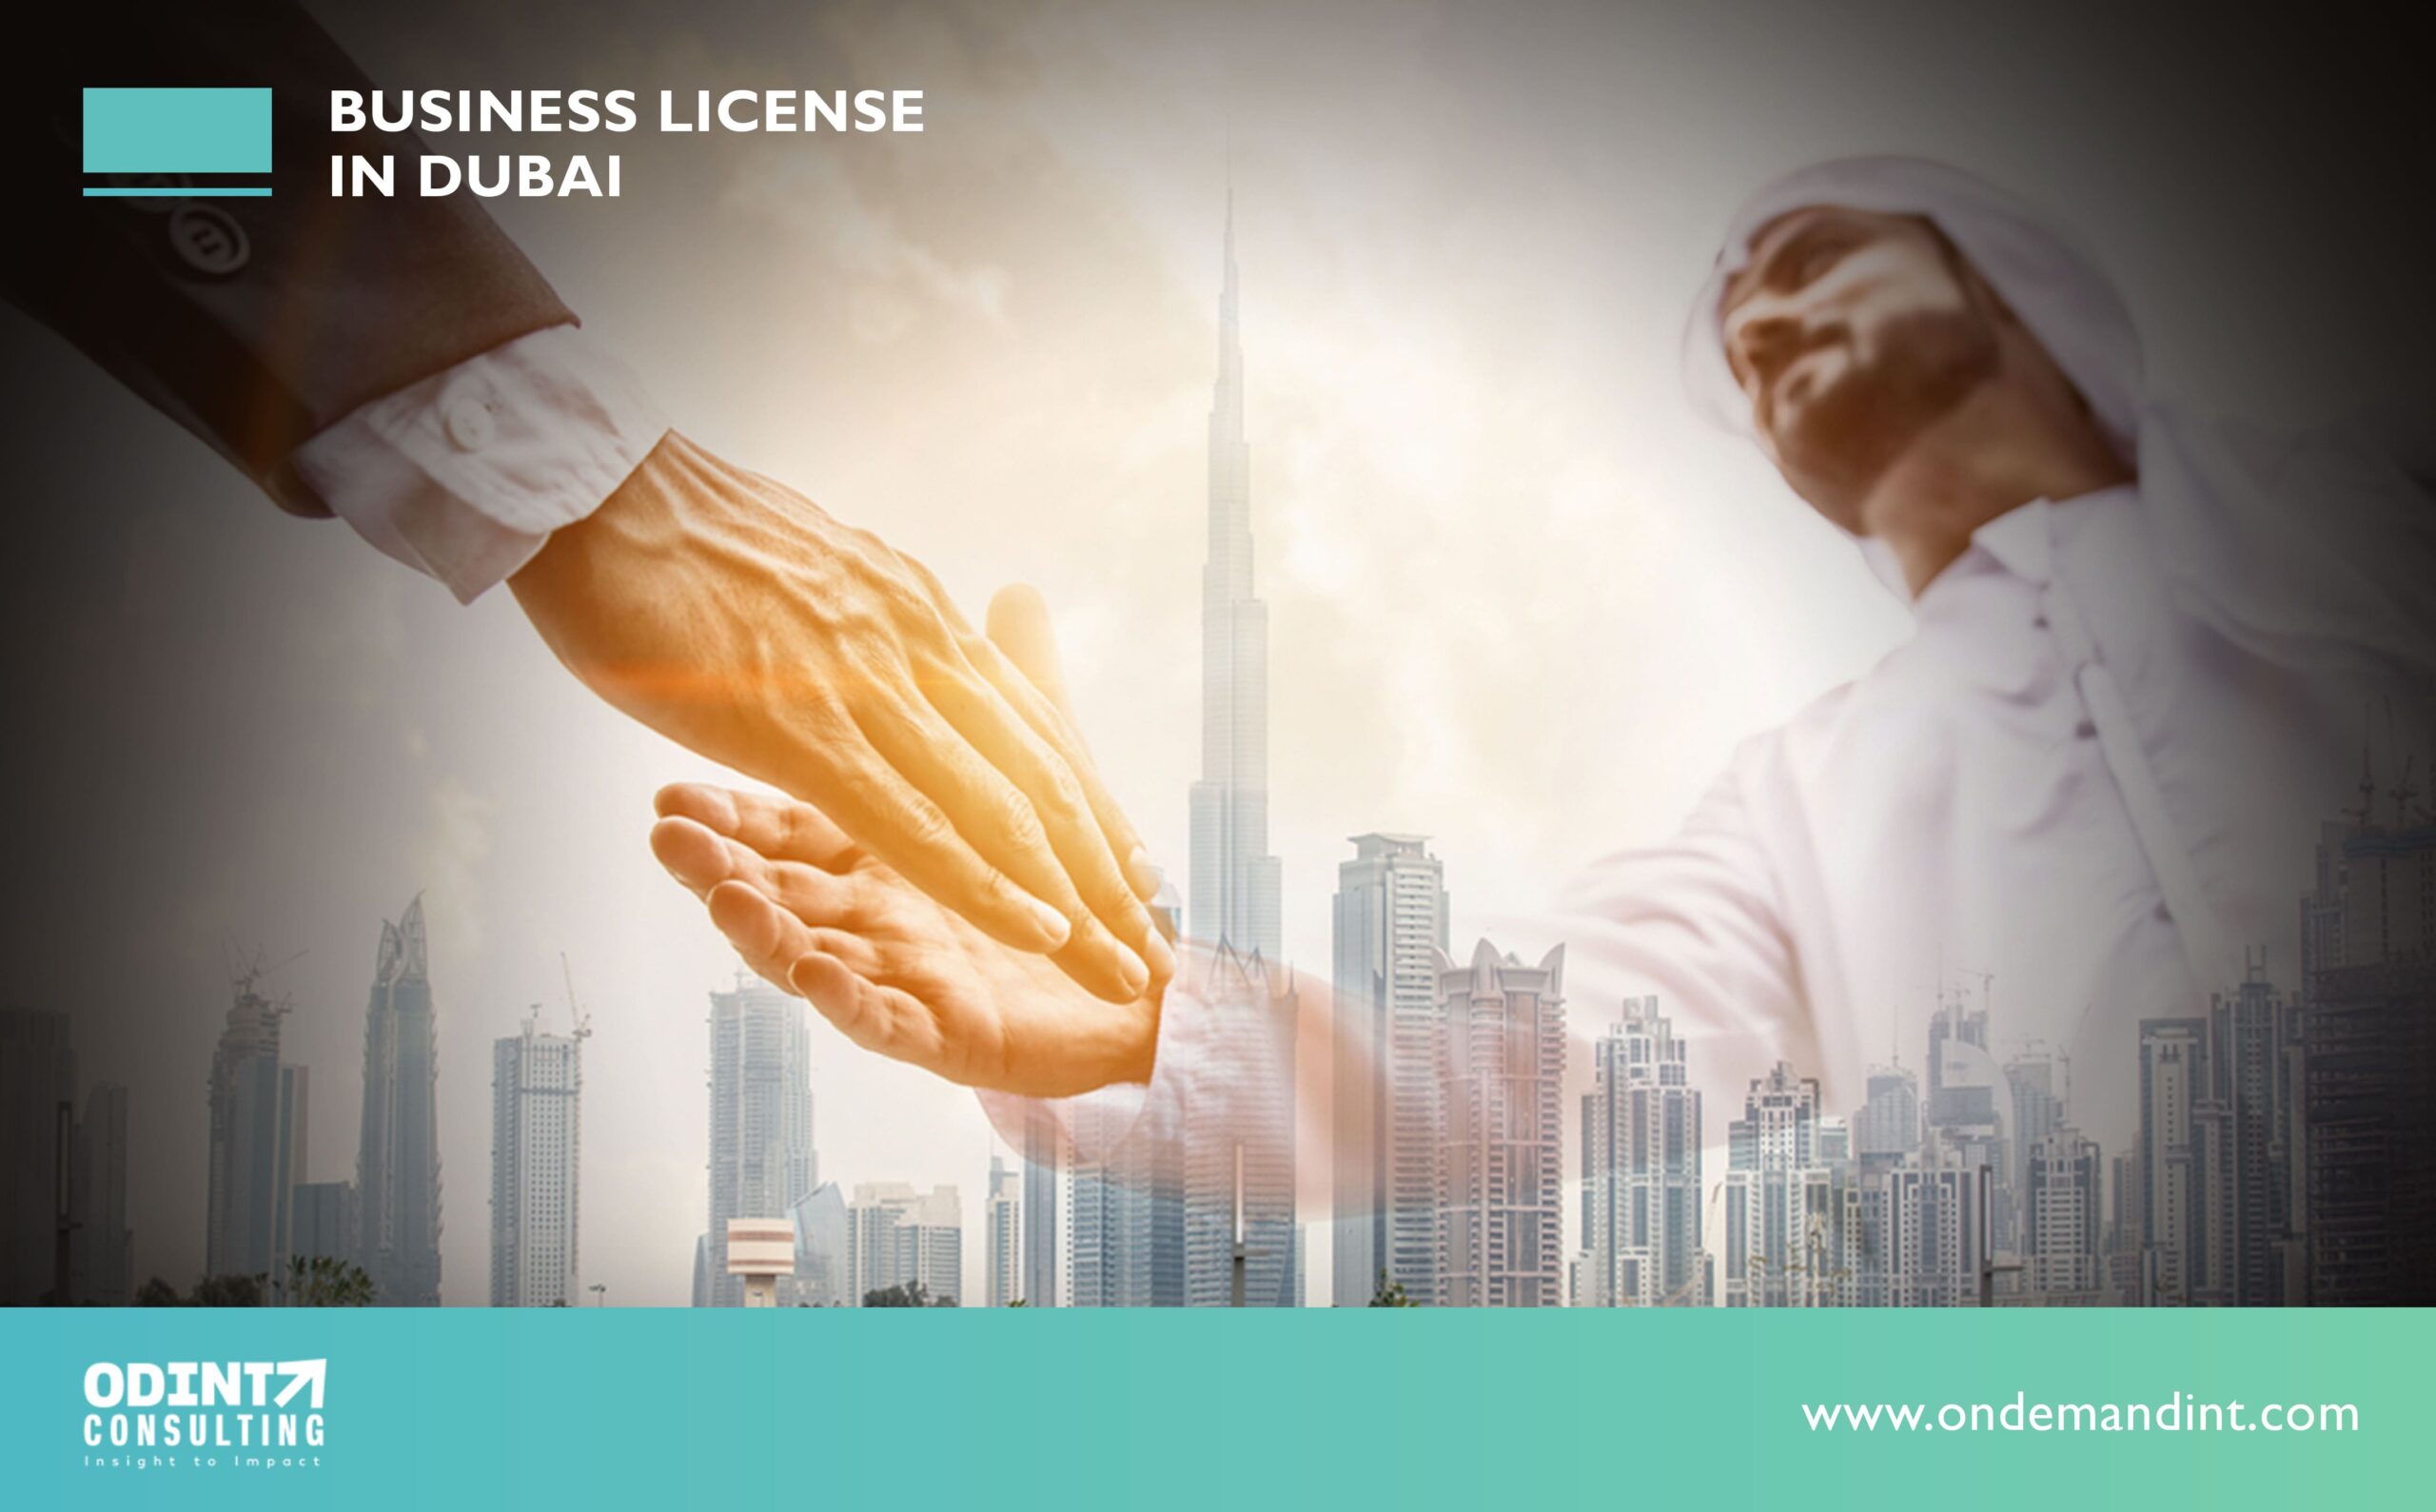 Business License in Dubai: Requirements & Types Explained